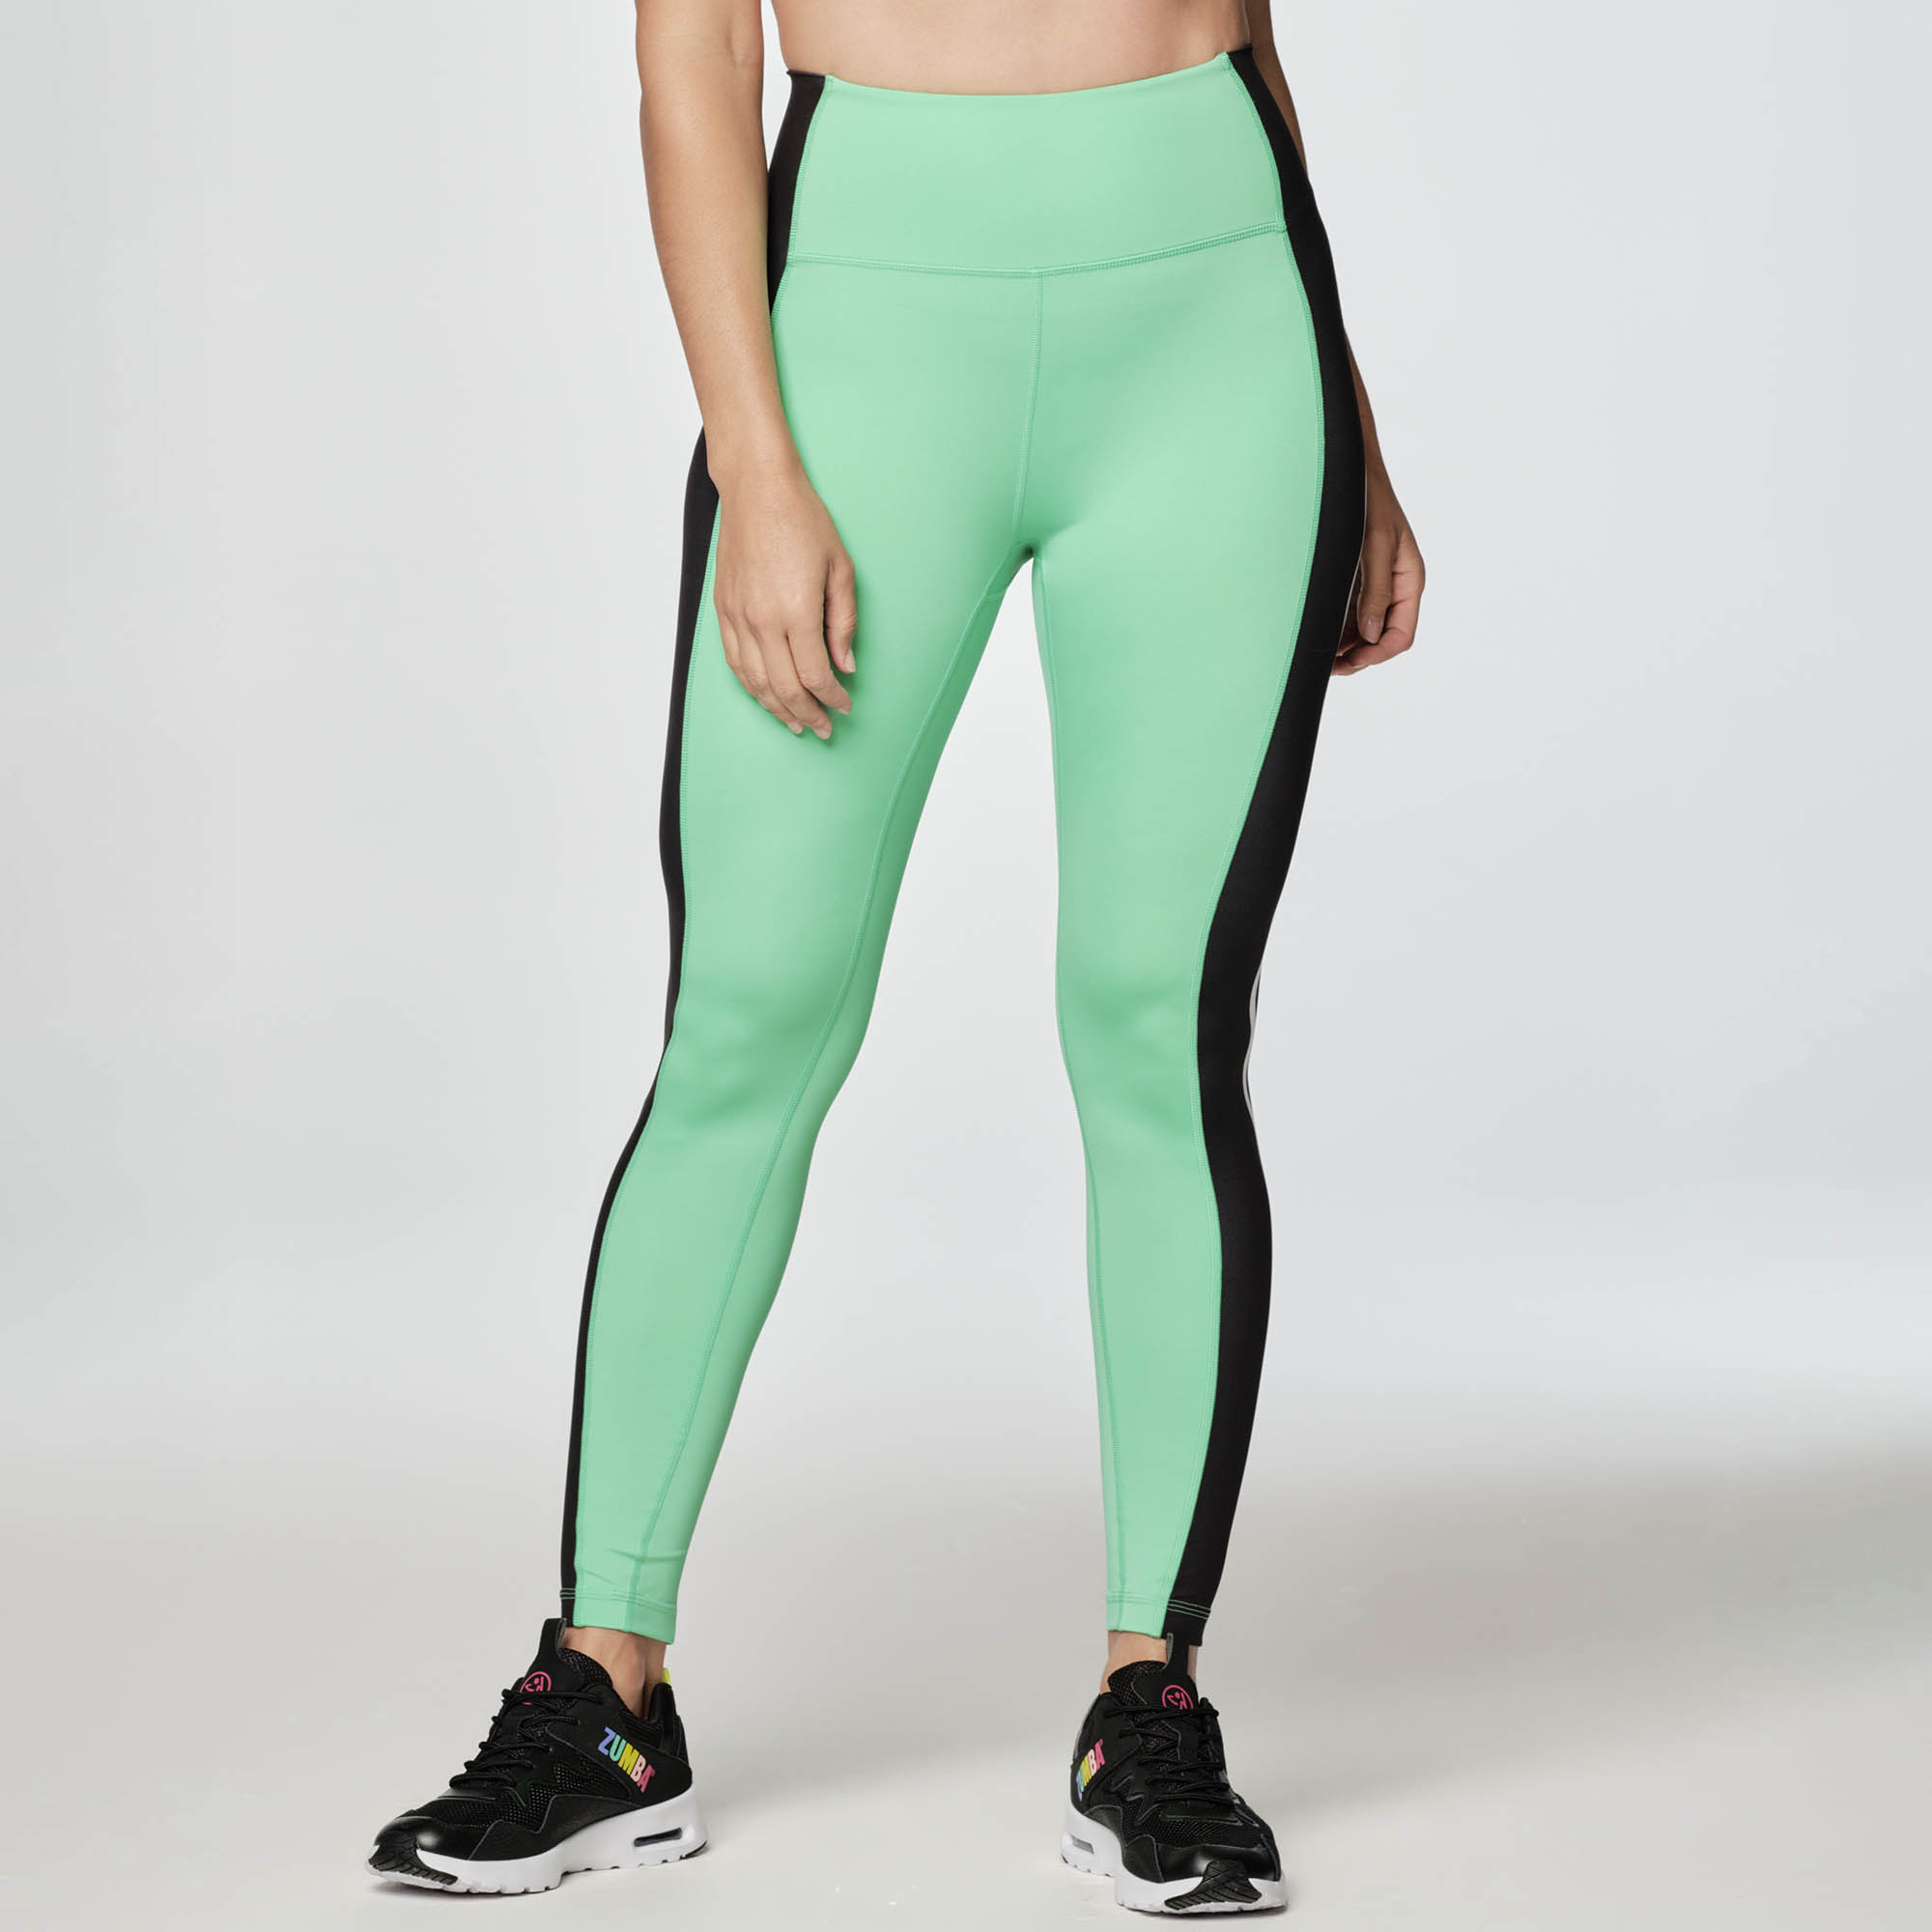 Zumba X Crayola Dance In Color High Waisted Ankle Leggings